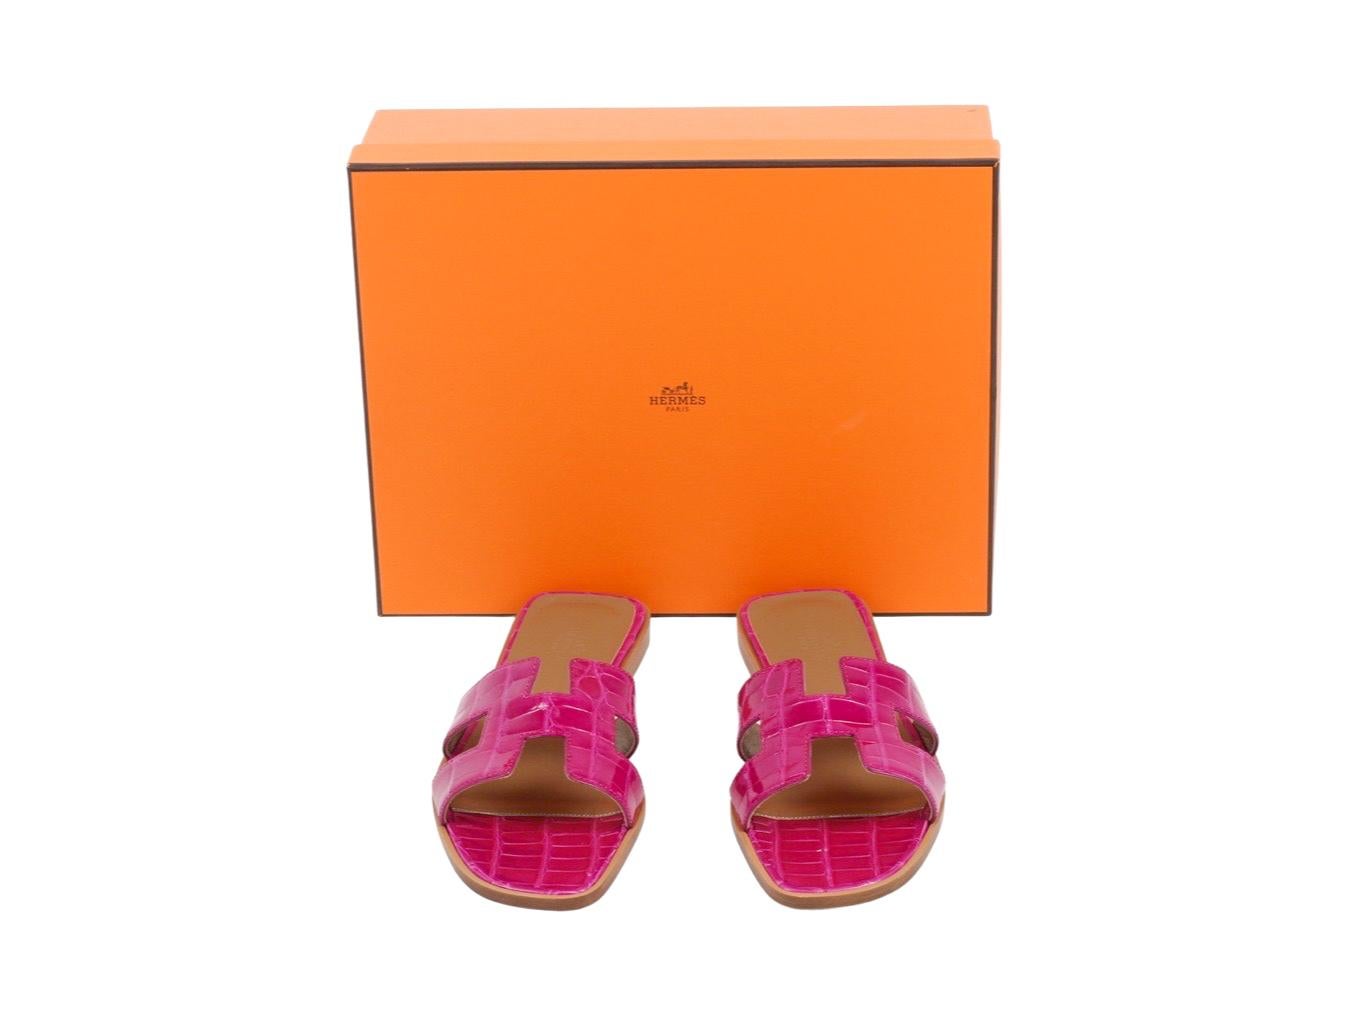 Hermès Oran Sandals crafted in a shiny alligator skin in the shade of Pink Electric. Signature double strap in the form of 'H' shape. Sole and heel are crafted out of stacked wood. Please note that there is light wear on the sole as they have been